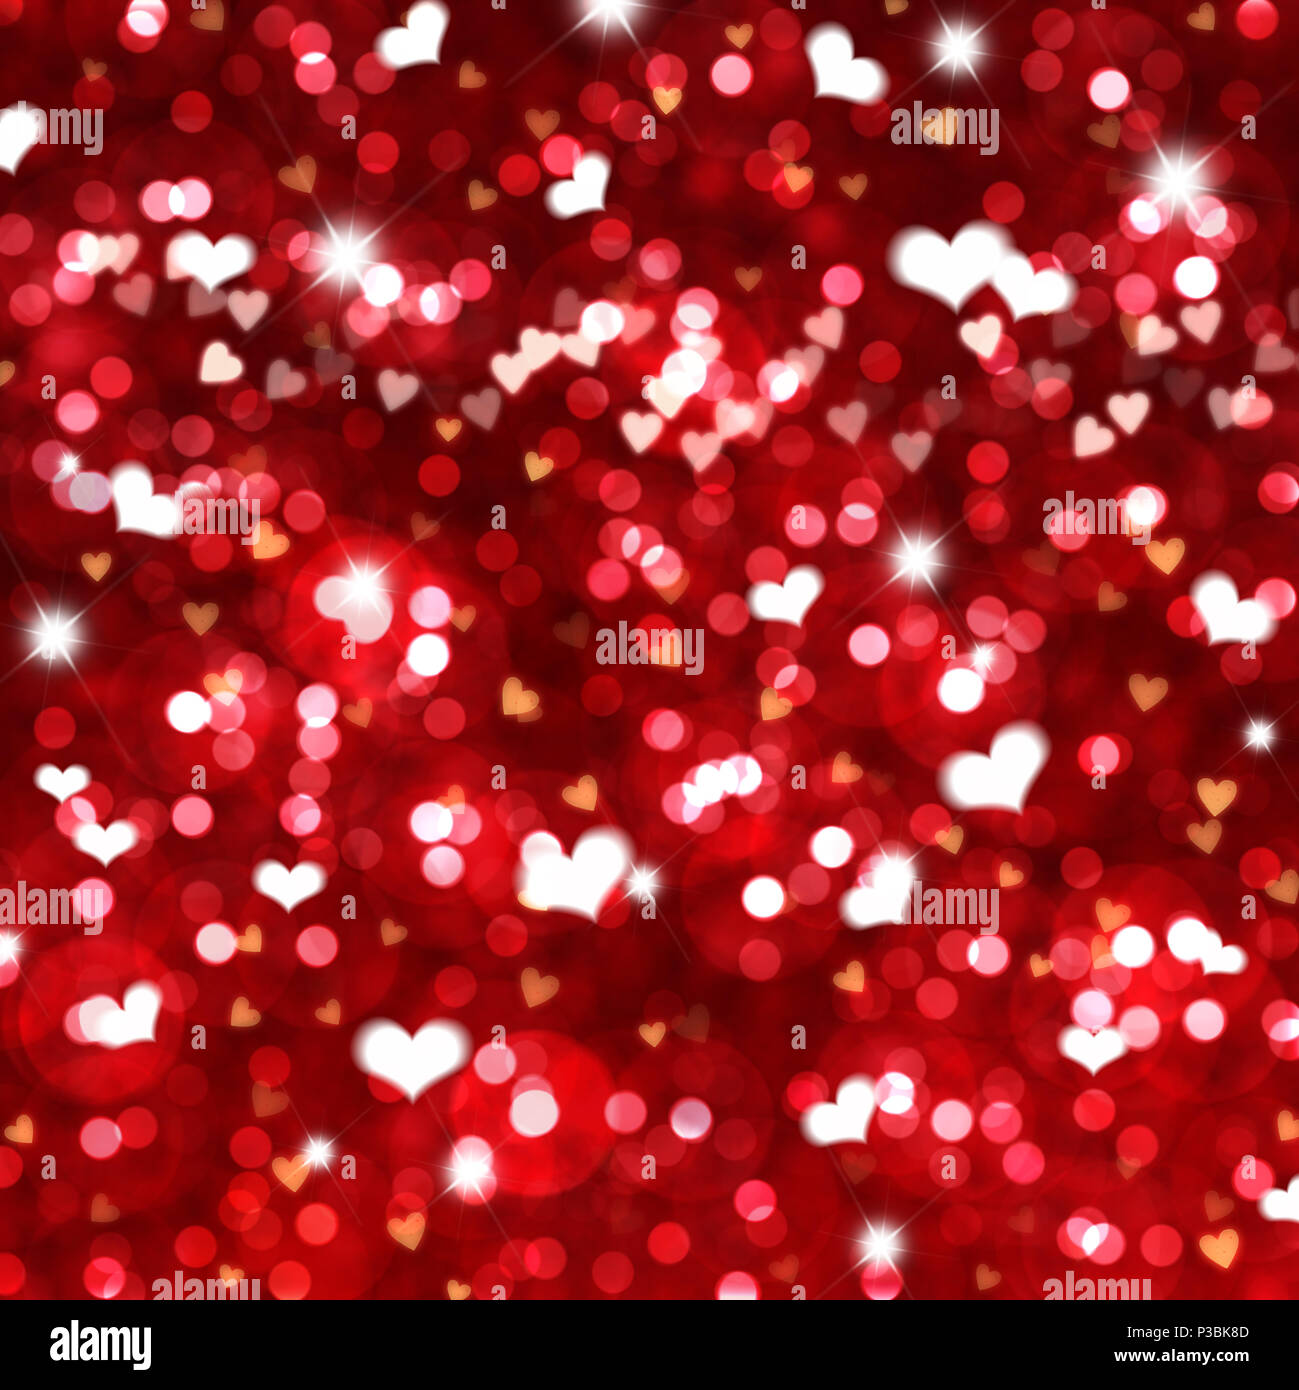 Valentine's Day background of heart shaped bokeh lights Stock Photo